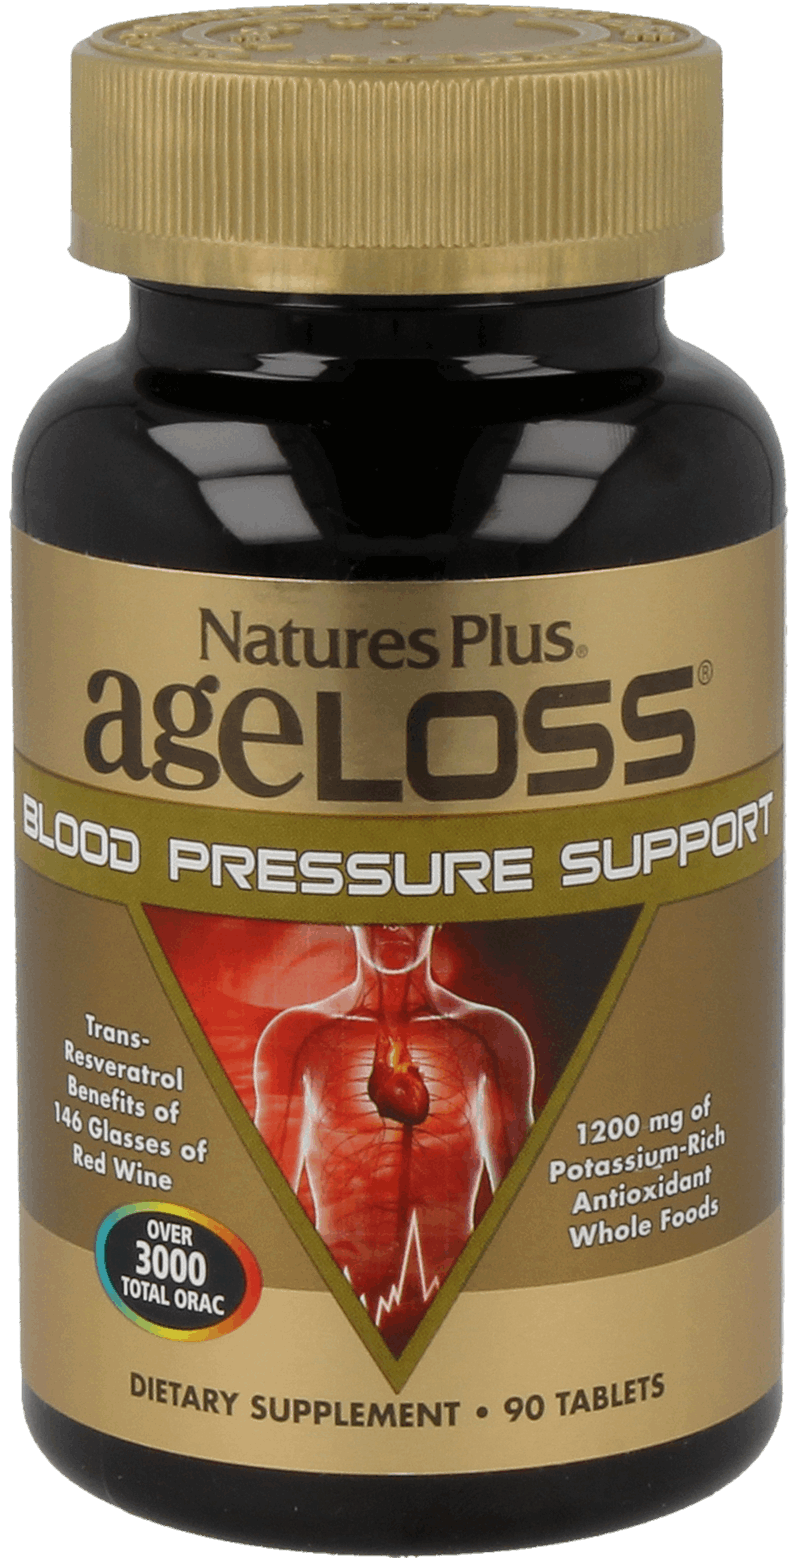 AgeLoss® Blood Pressure Support 